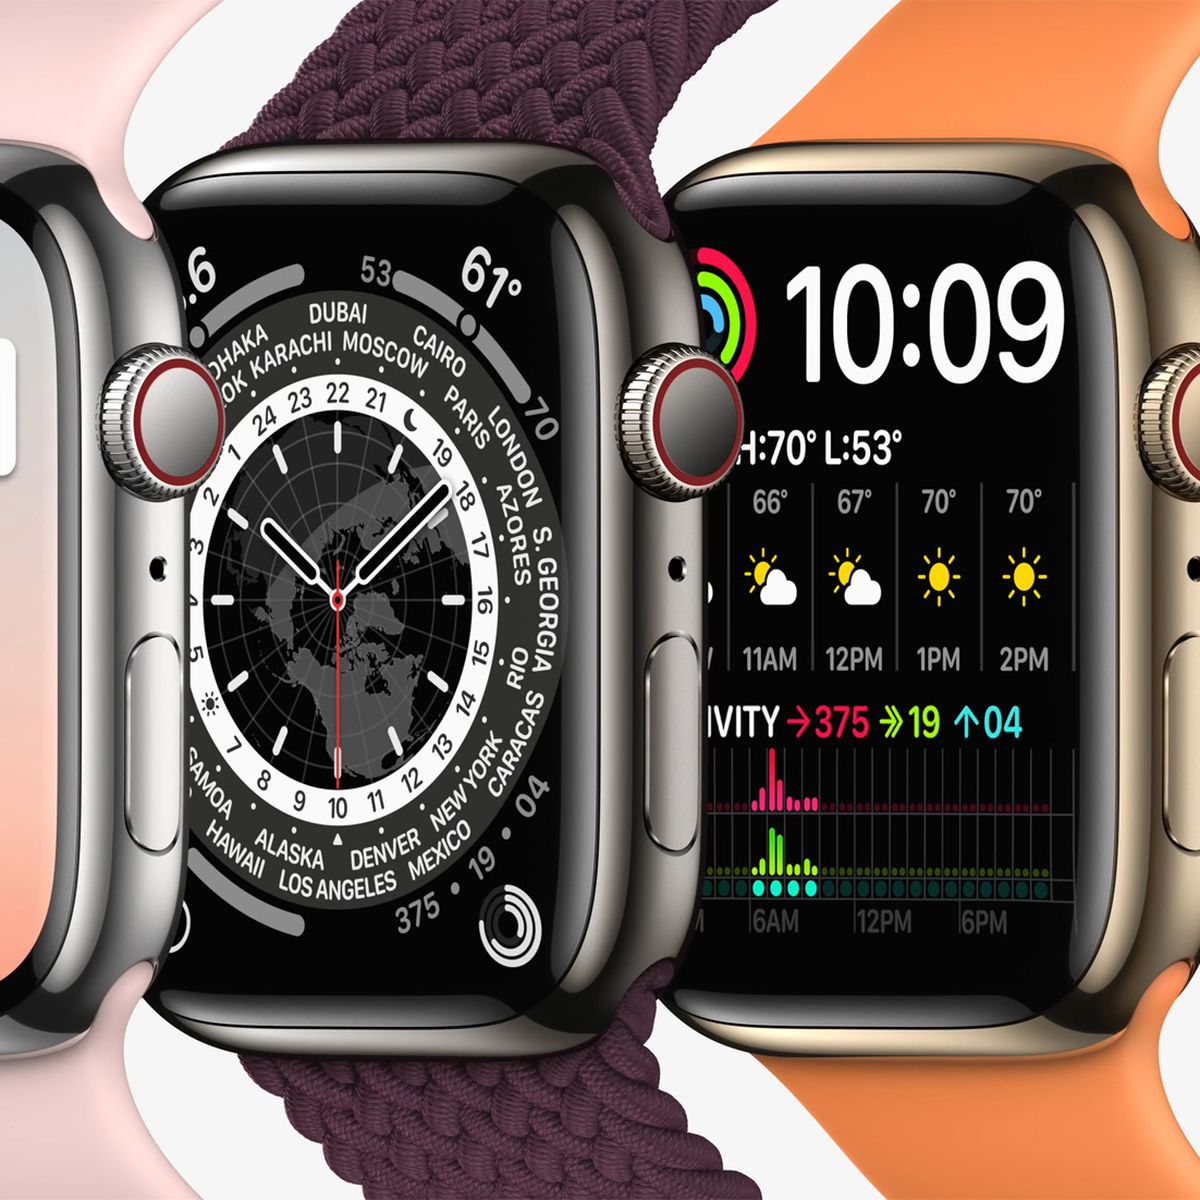 dragt skygge Hearty Apple Watch Series 7 Features Exclusive Watch Faces Including Modular Max  and Continuum - MacRumors